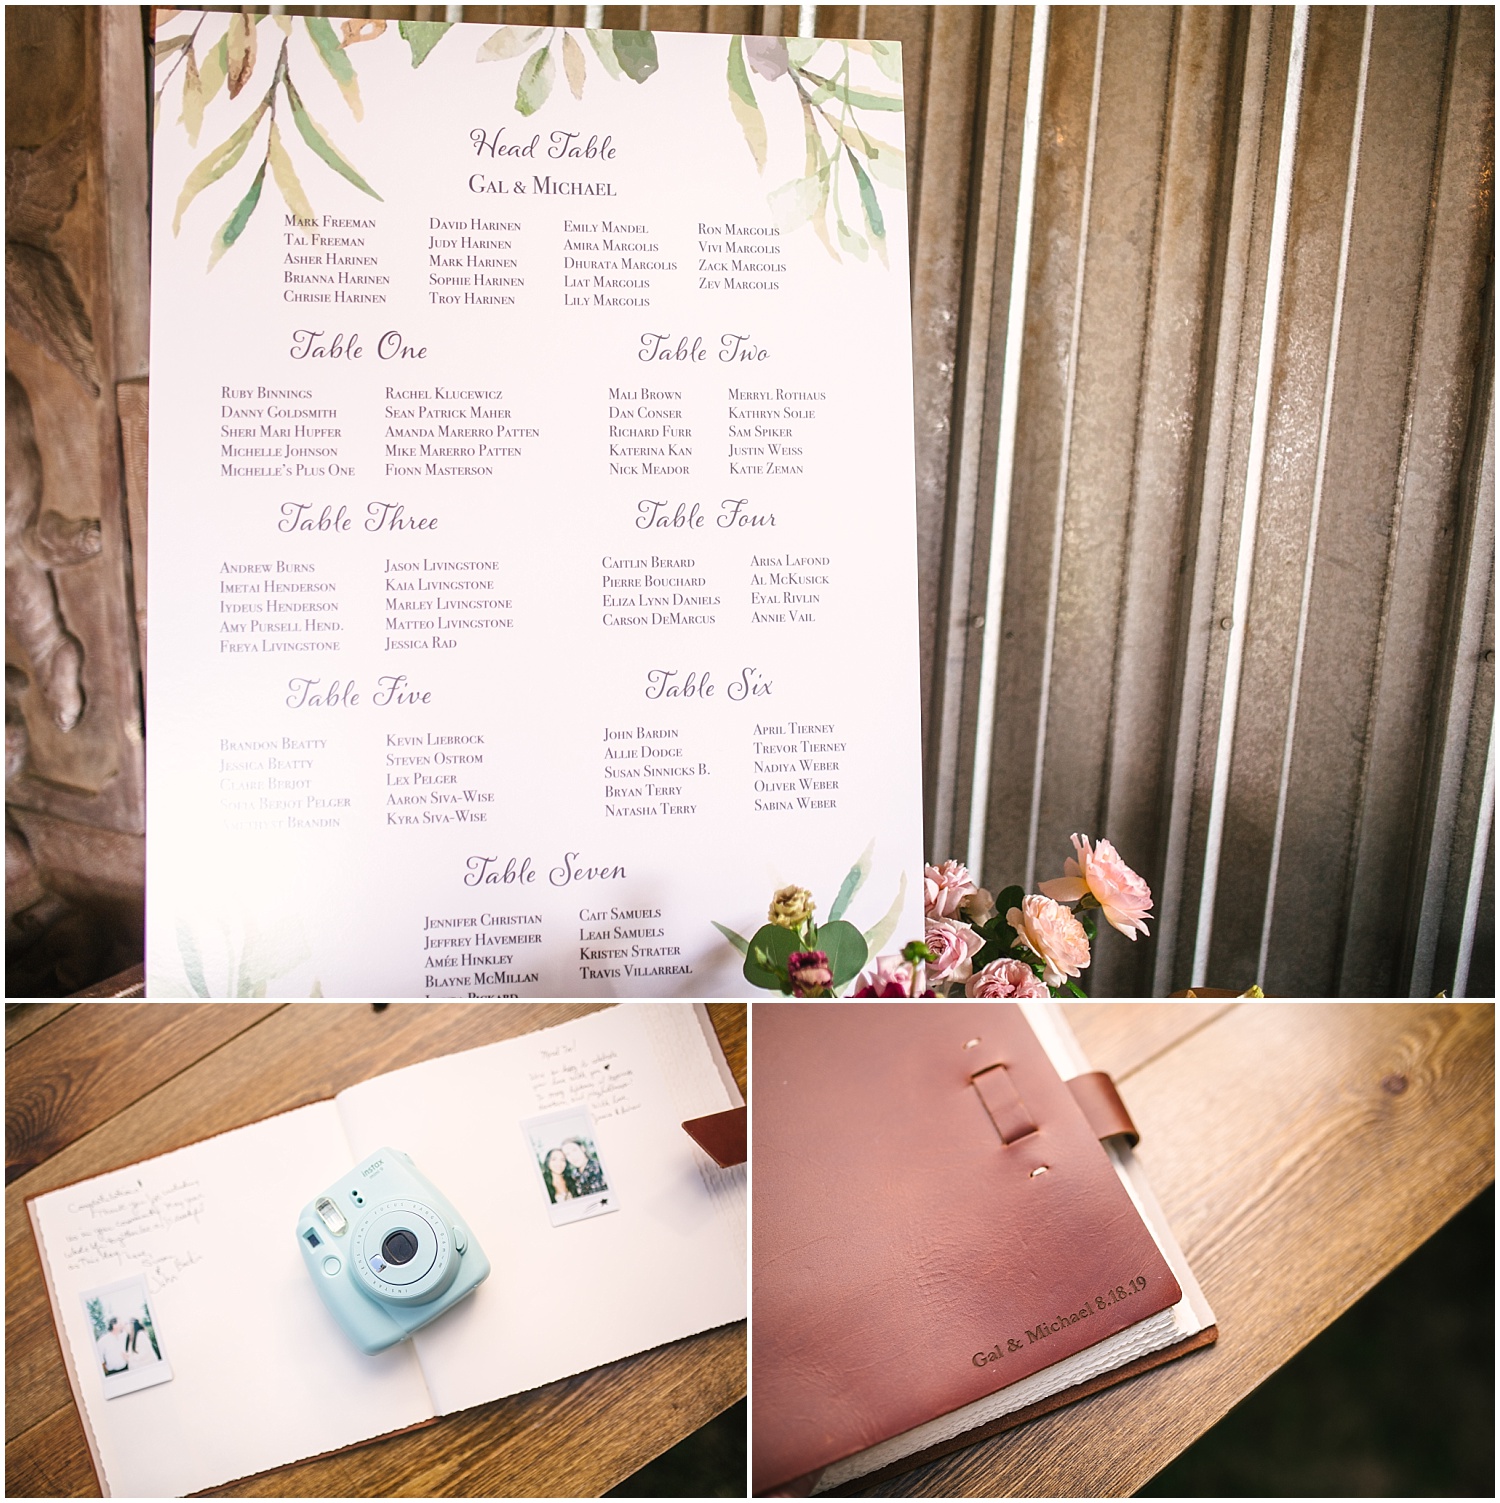 Lone Hawk Farm wedding guest book and seating chart